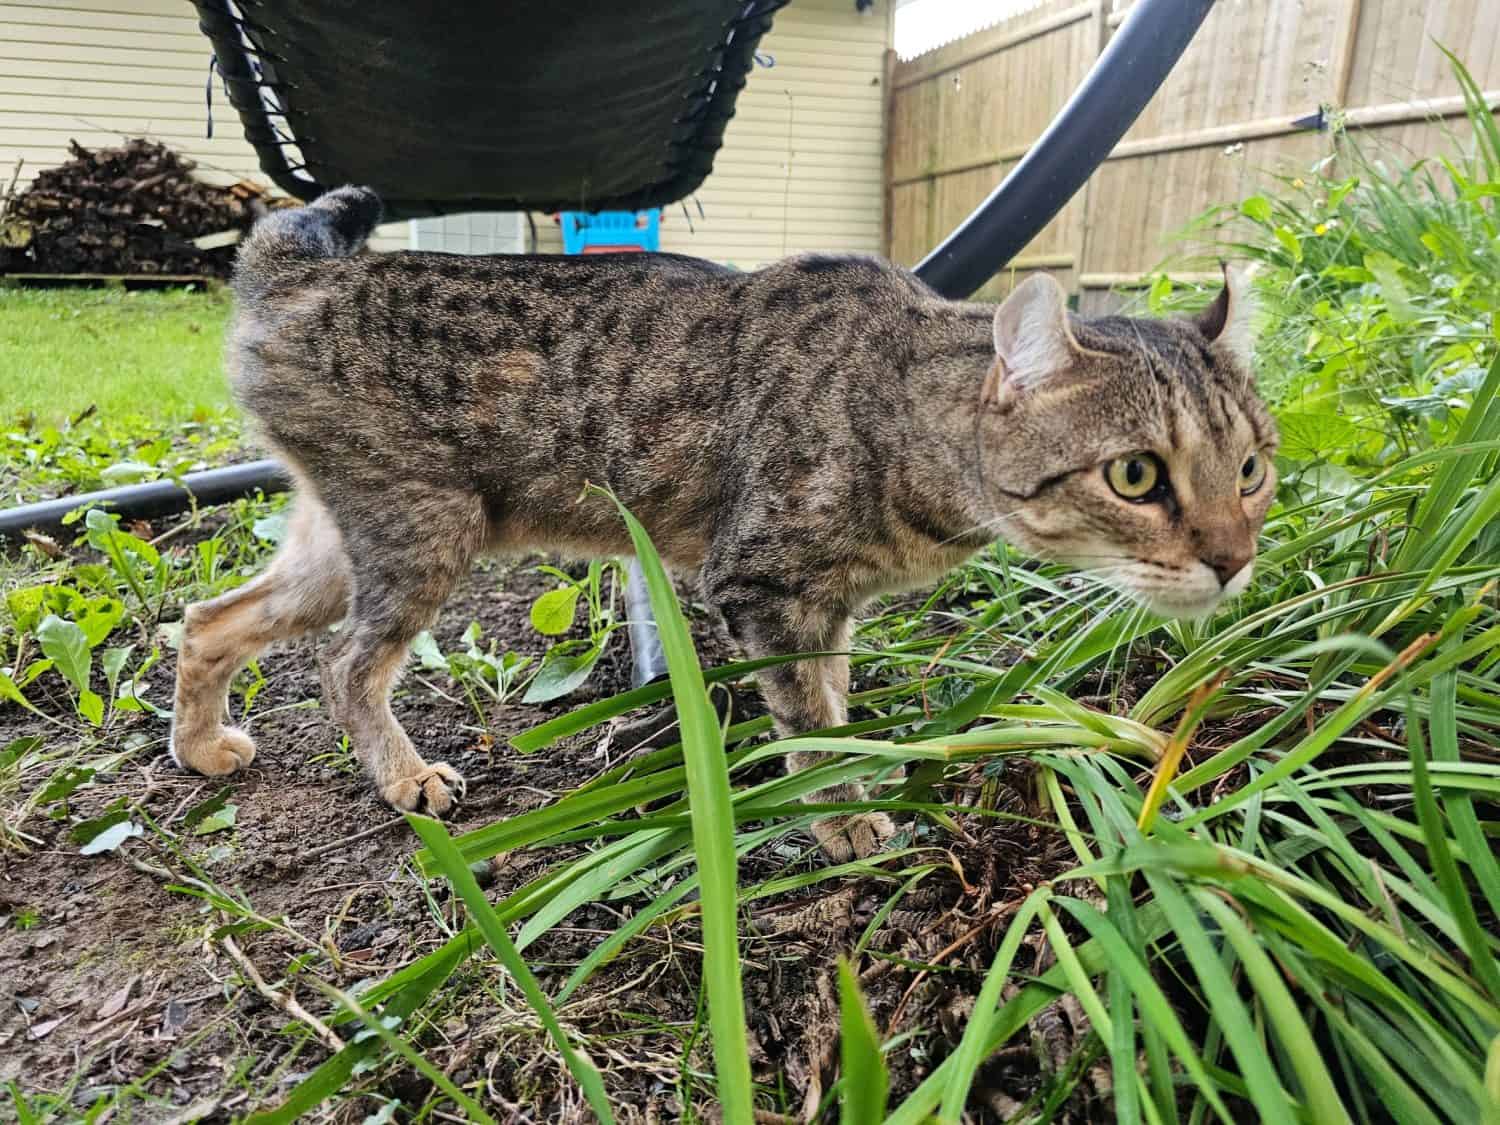 A spotted highlander cat outside exploring a garden area in a yard.